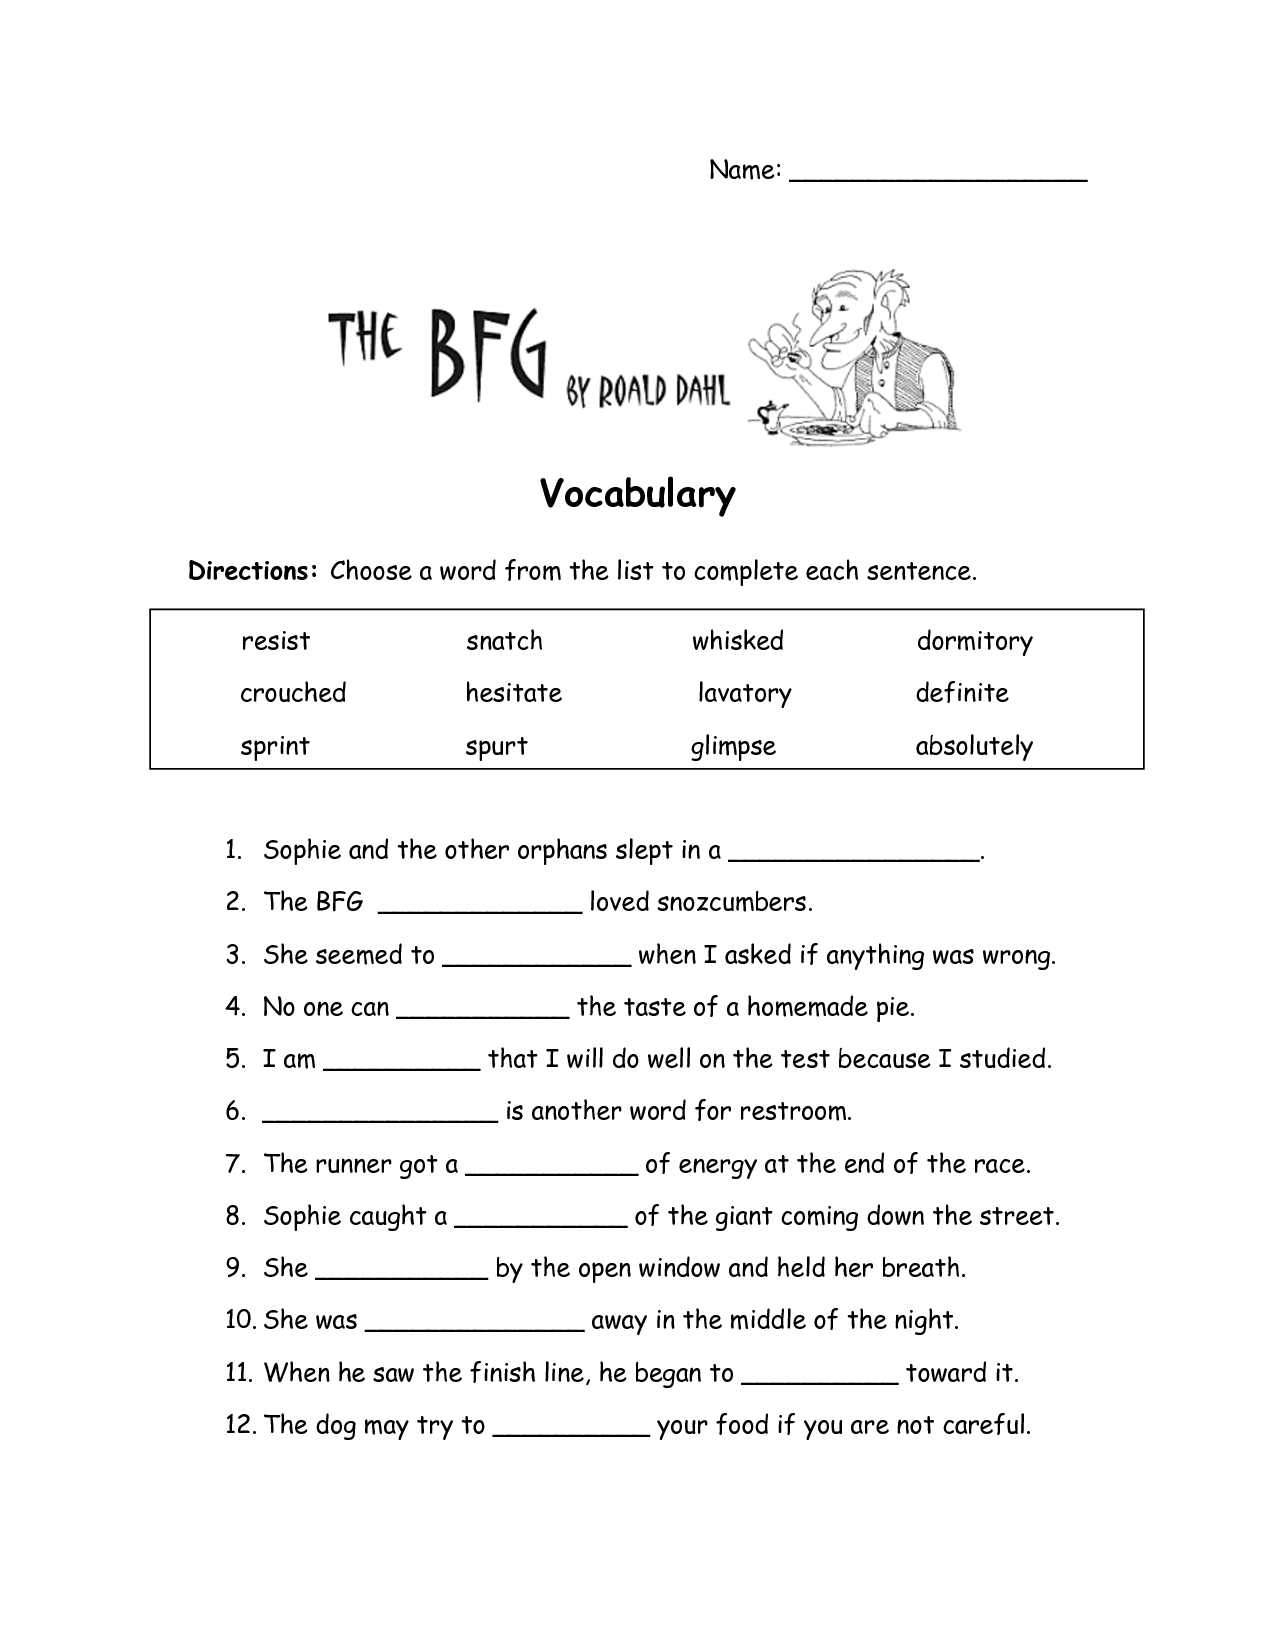 Question Words Worksheet Along with the Bfg Worksheets the Bfg Vocabulary Worksheet